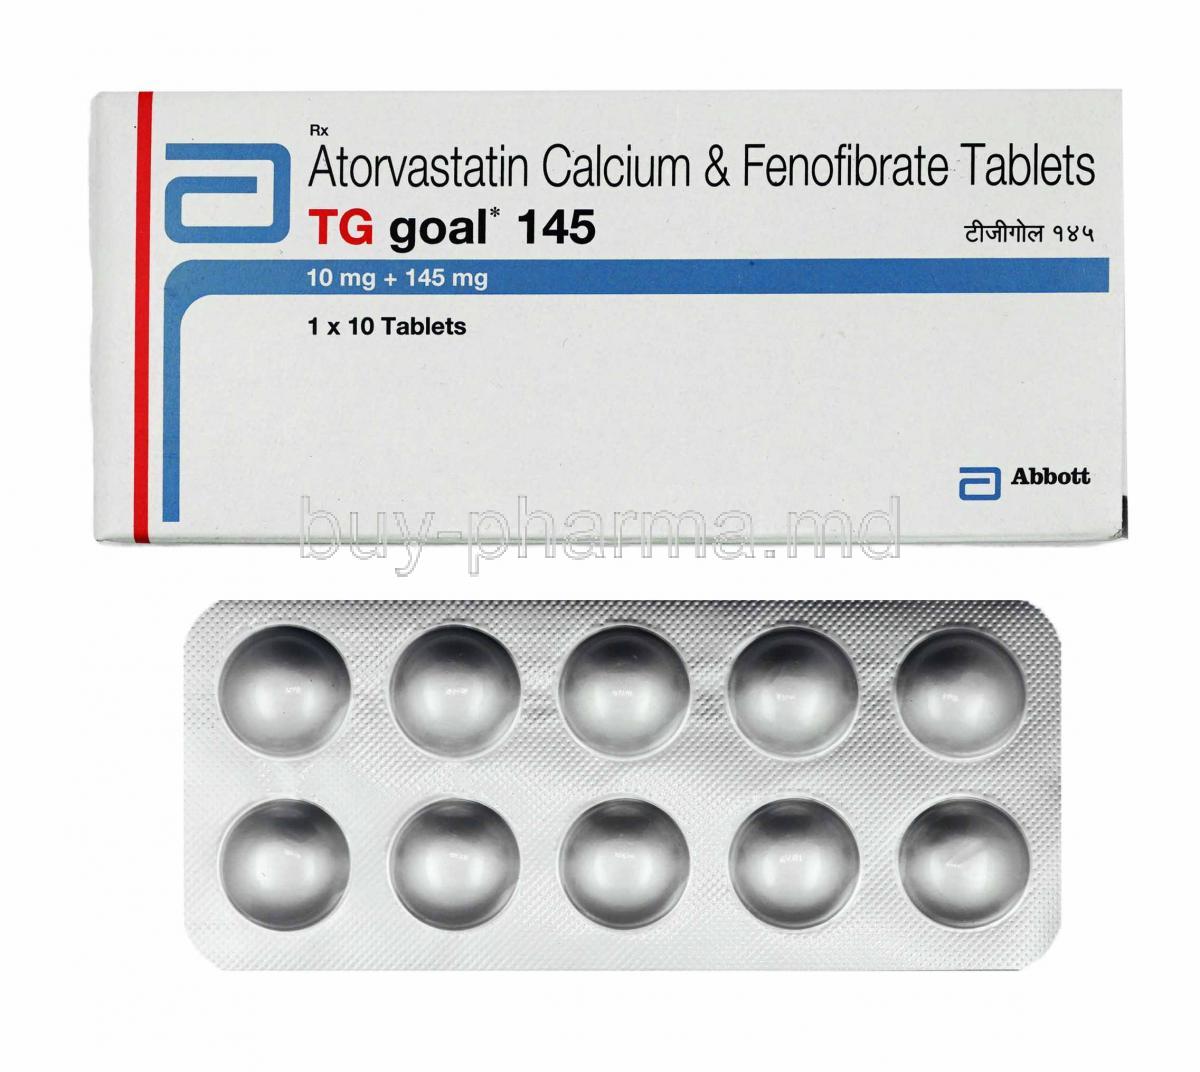 TG Goal, Atorvastatin and Fenofibrate box and tablets